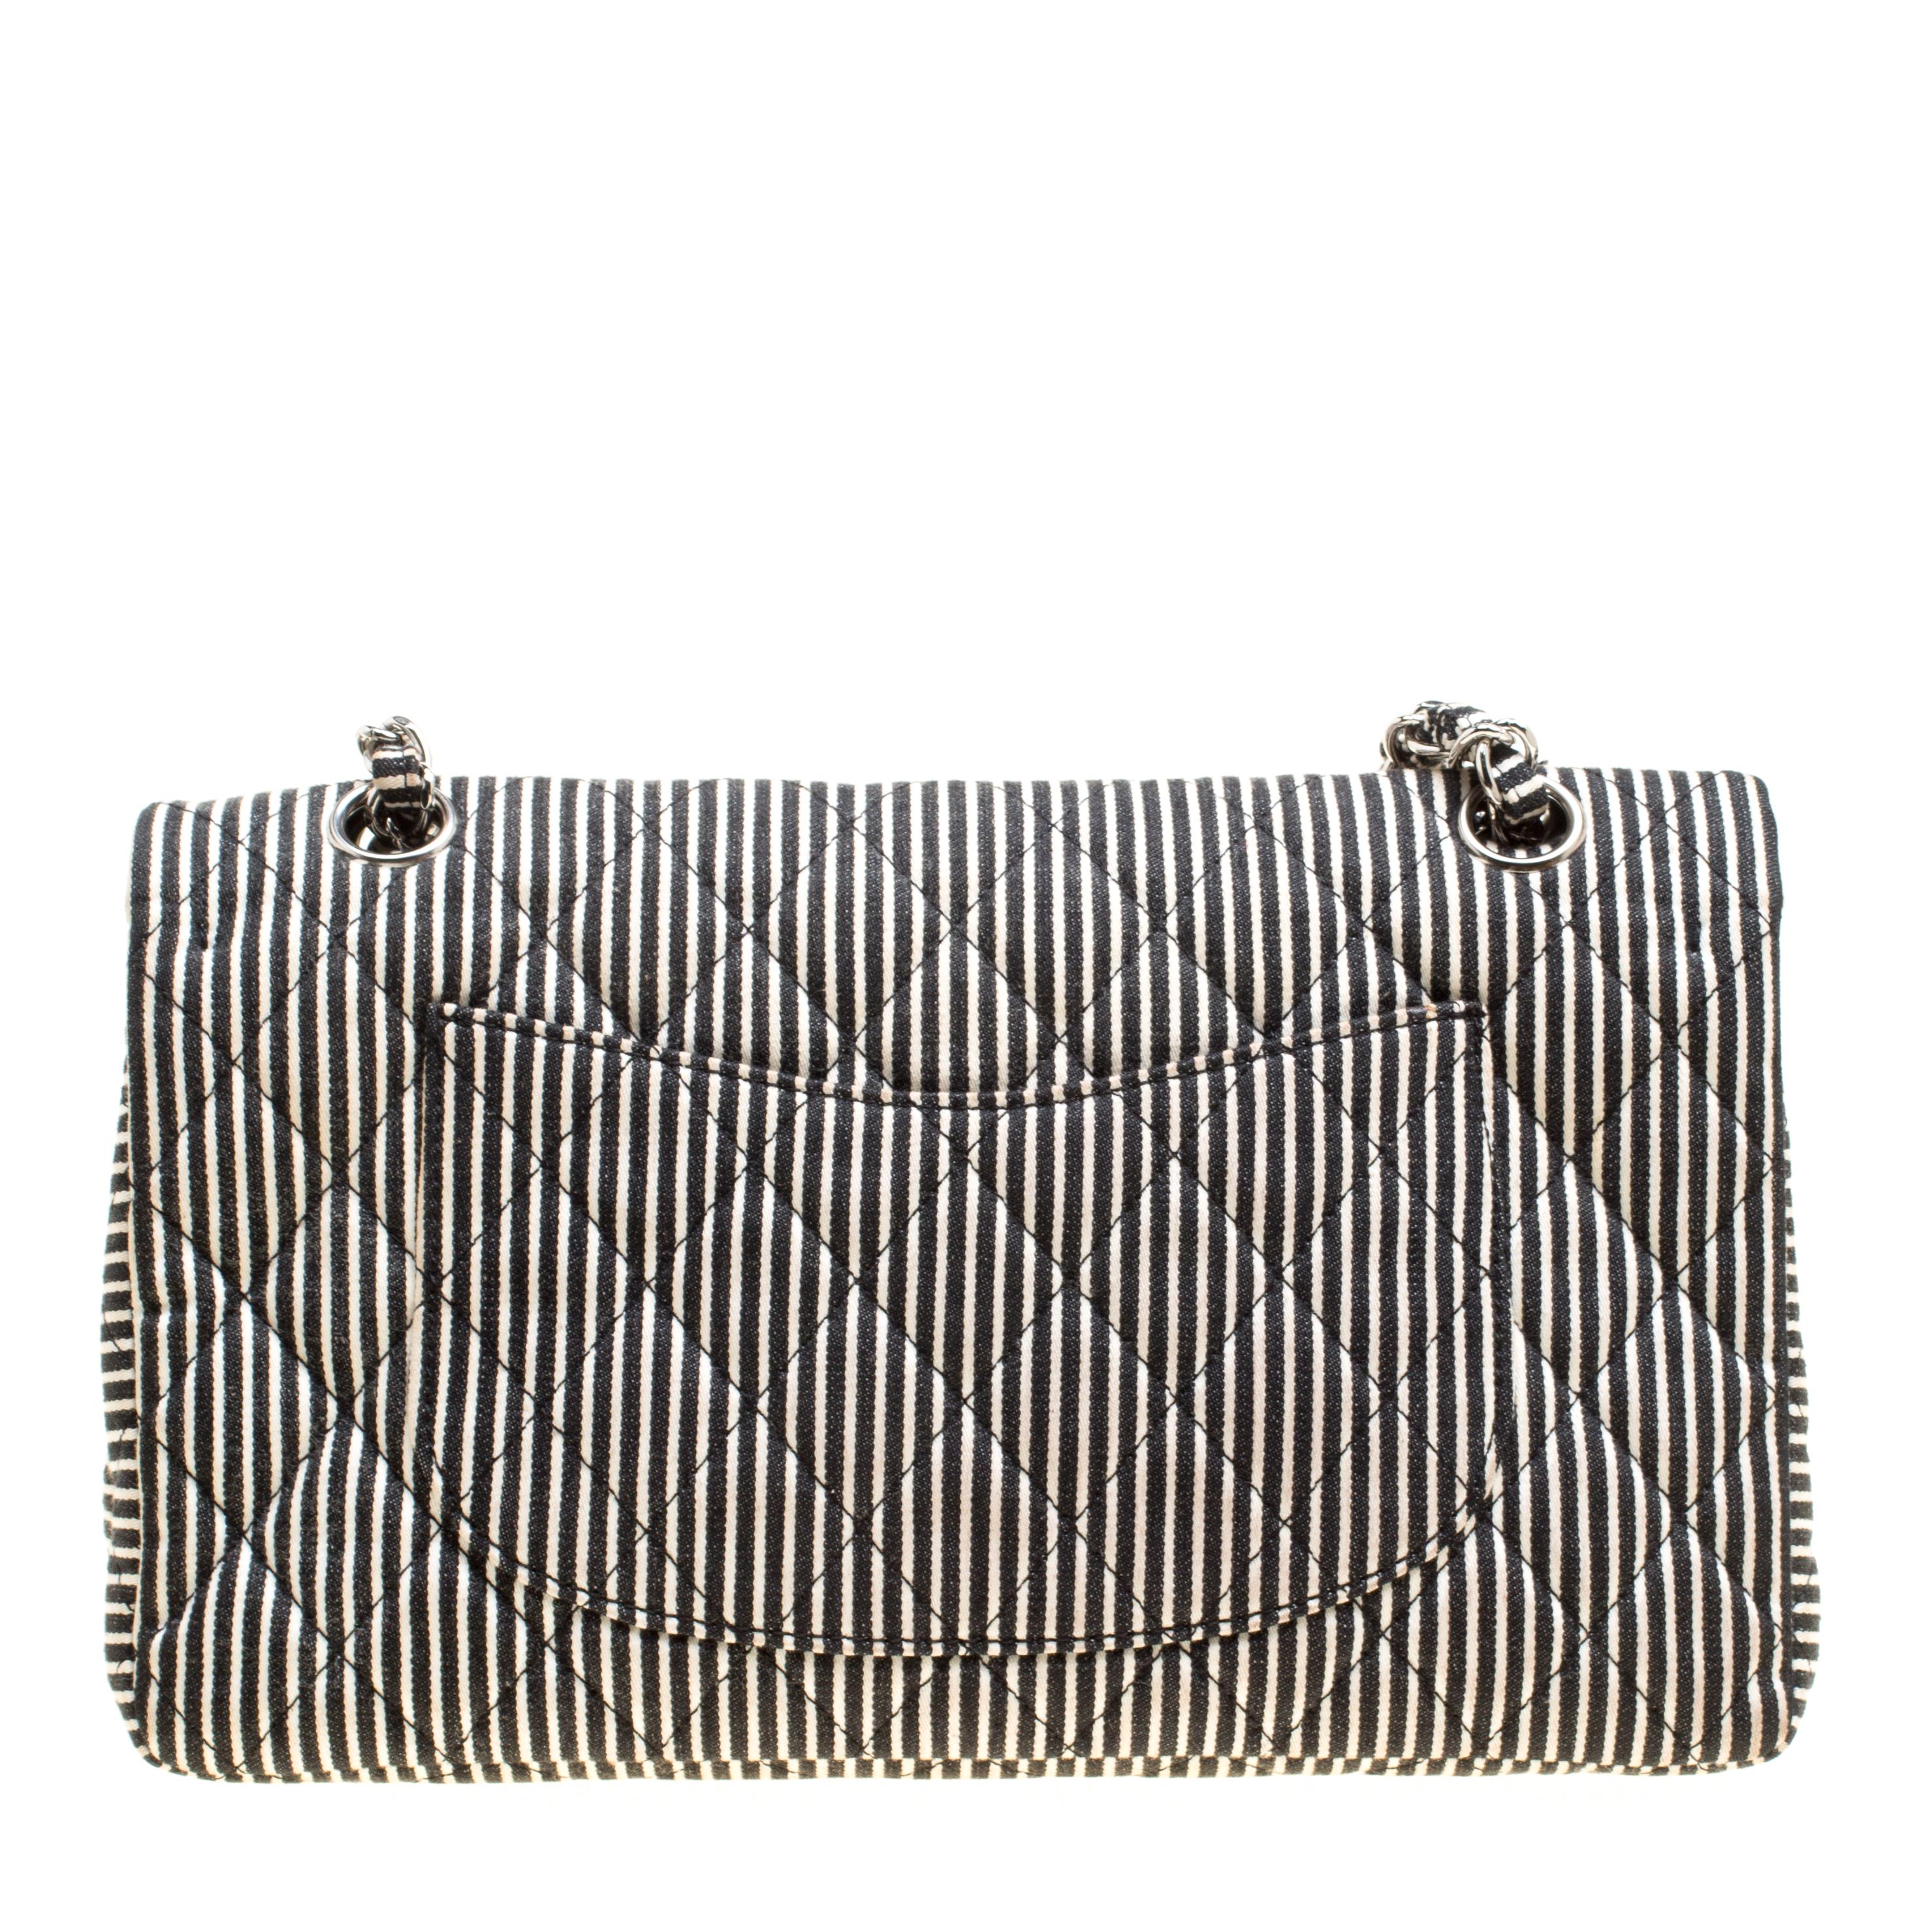 Chanel's Flap bags are the most iconic handbags. This rare and eye-catching piece is from their 2008 Cruise collection. This classic double flap bag is crafted from black and white stripe fabric along with intricate sequin detailing on the front